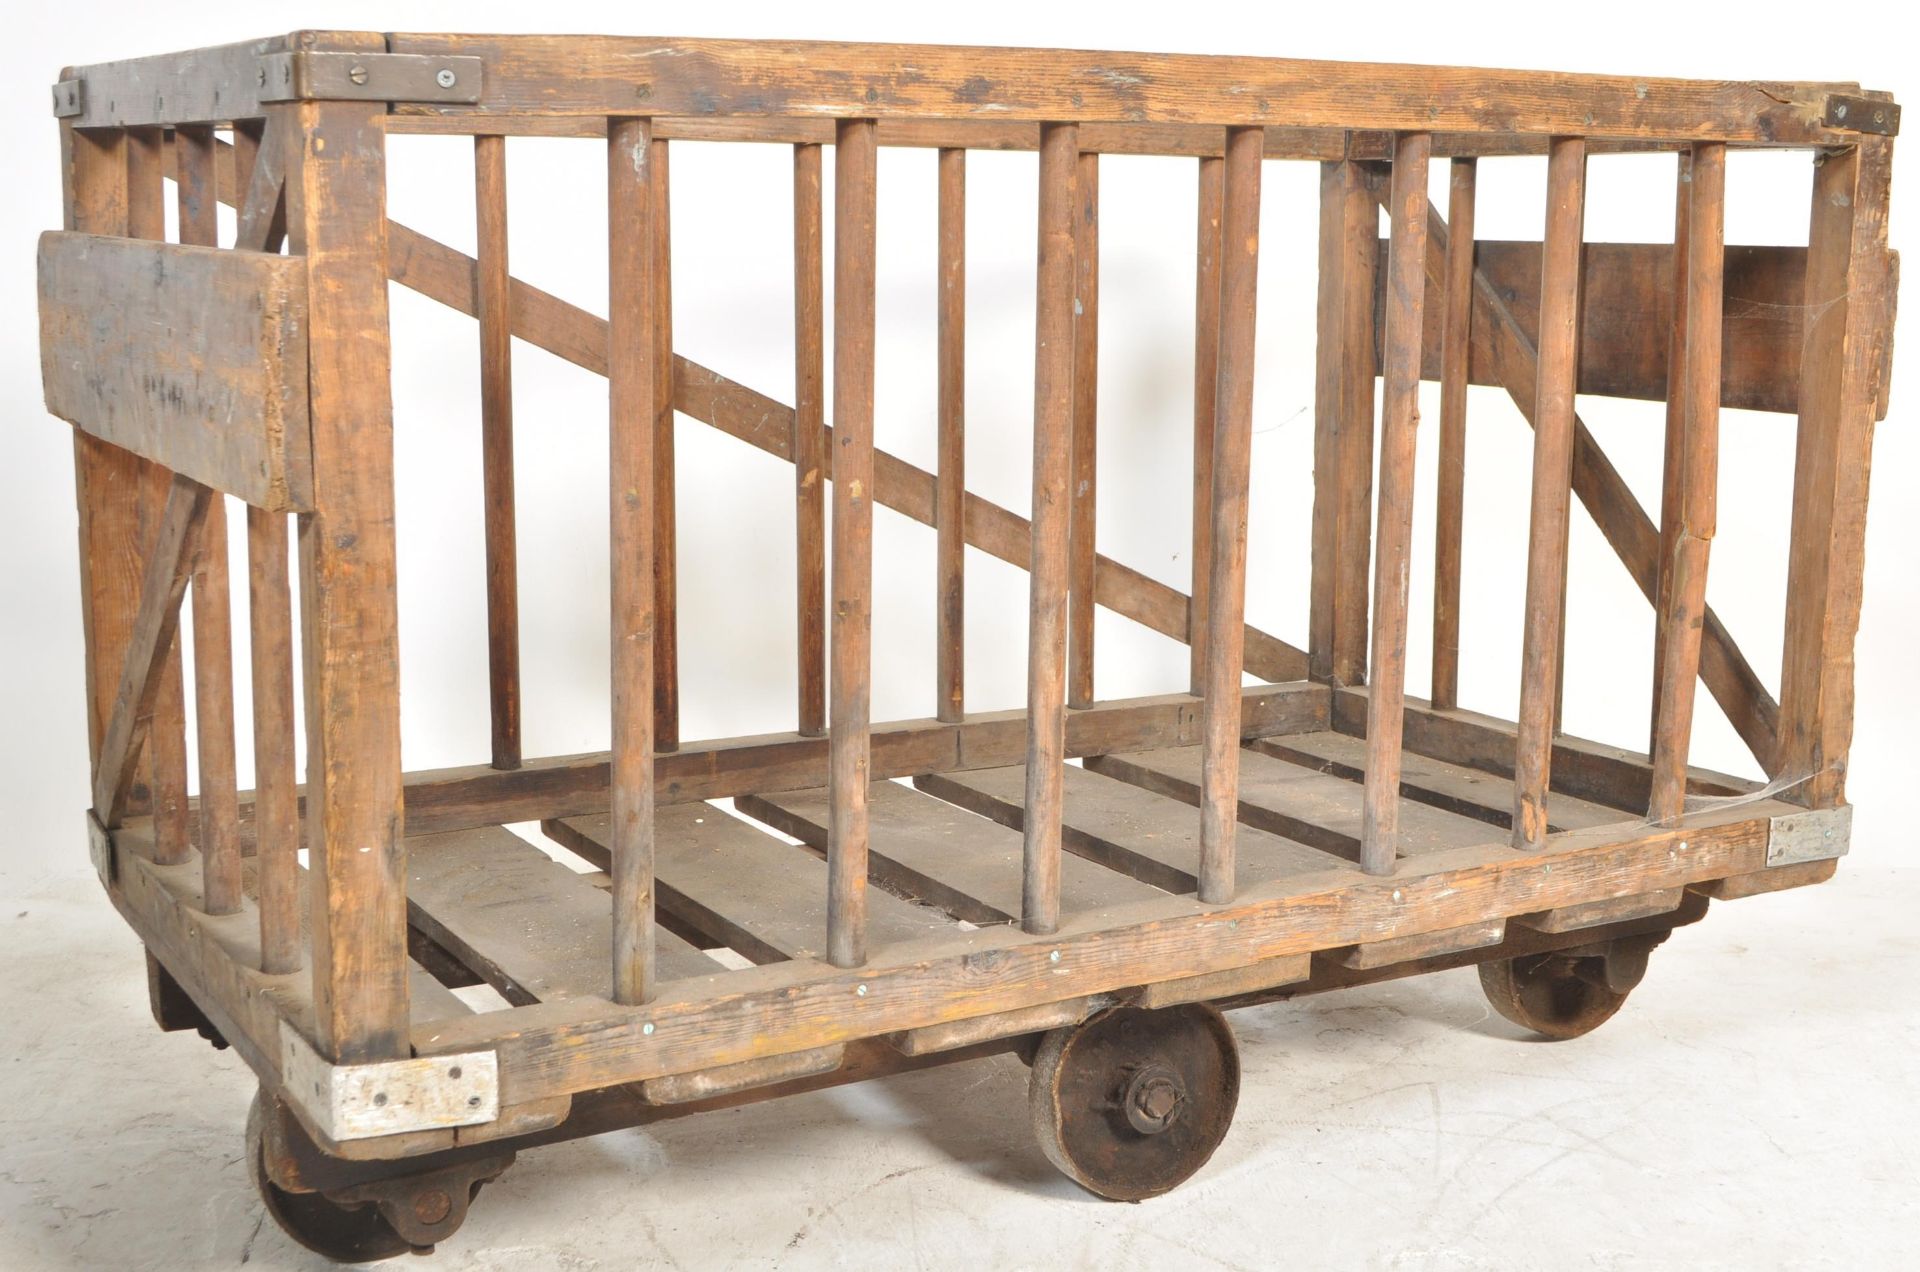 ANTIQUE VINTAGE INDUSTRIAL WOODEN GOODS CART MILL TROLLEY